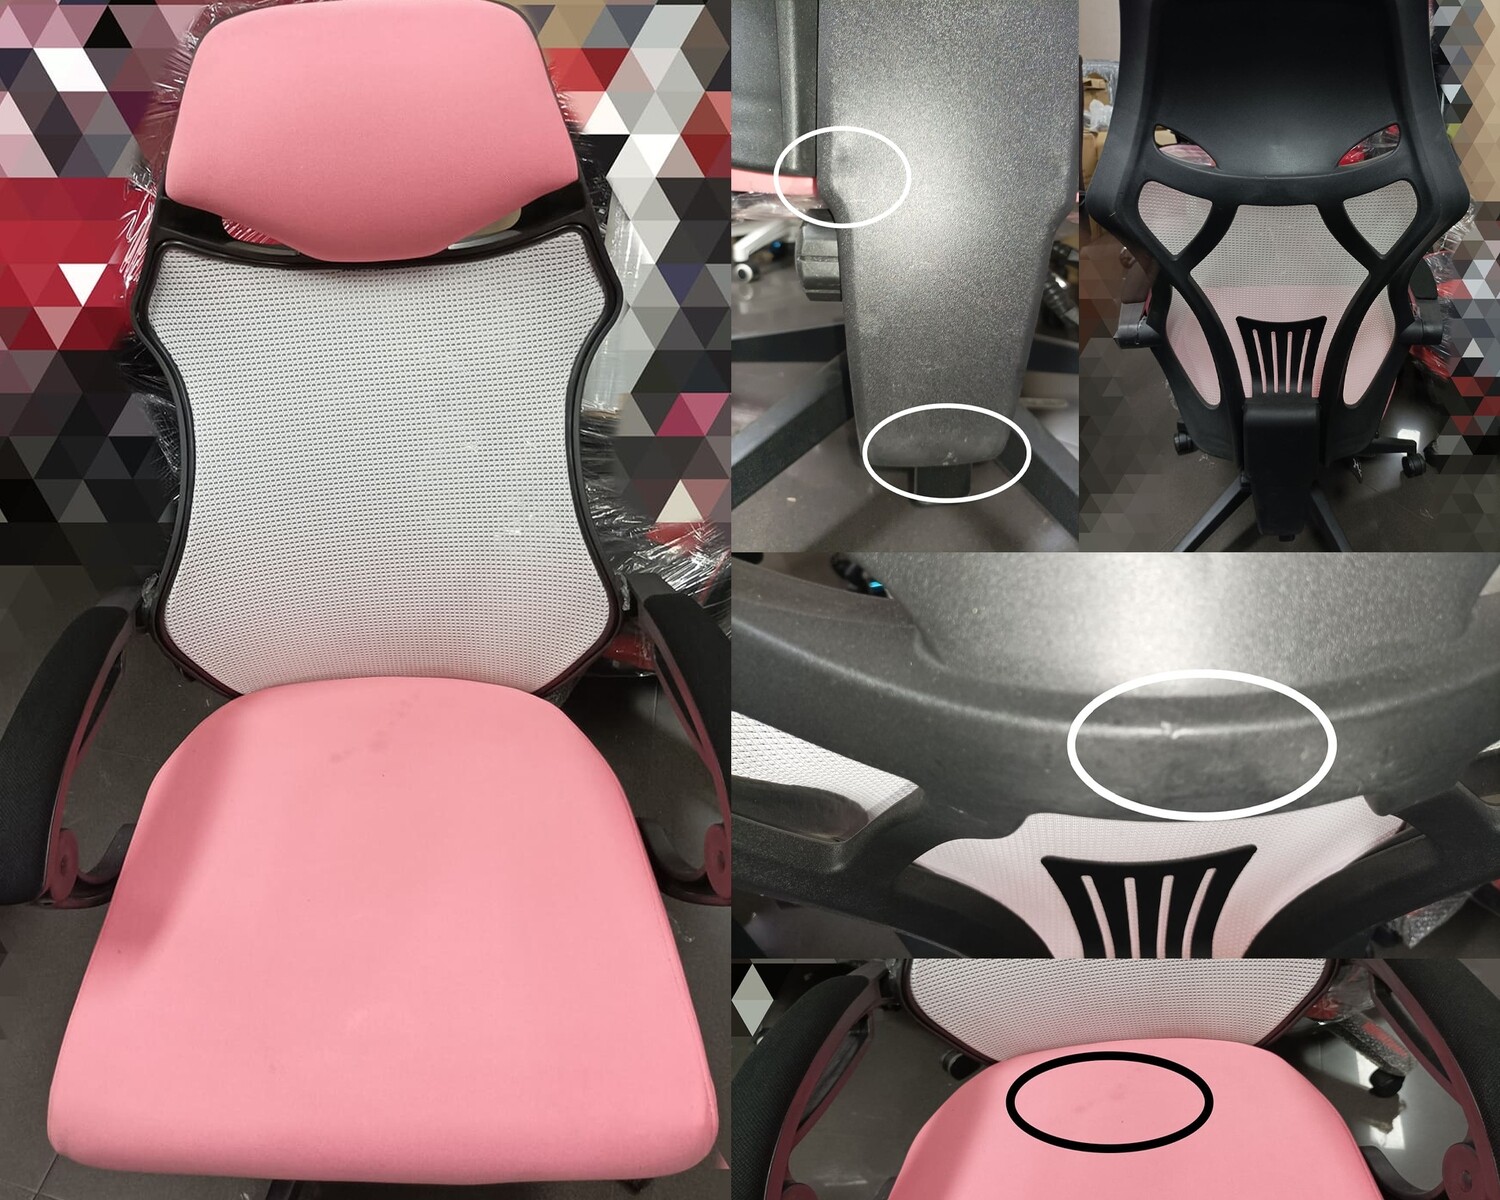 (Sale) OFX Gadiel Gaming Chair (Pink) (Light Stain/ Scratches & Diff. Armrest)